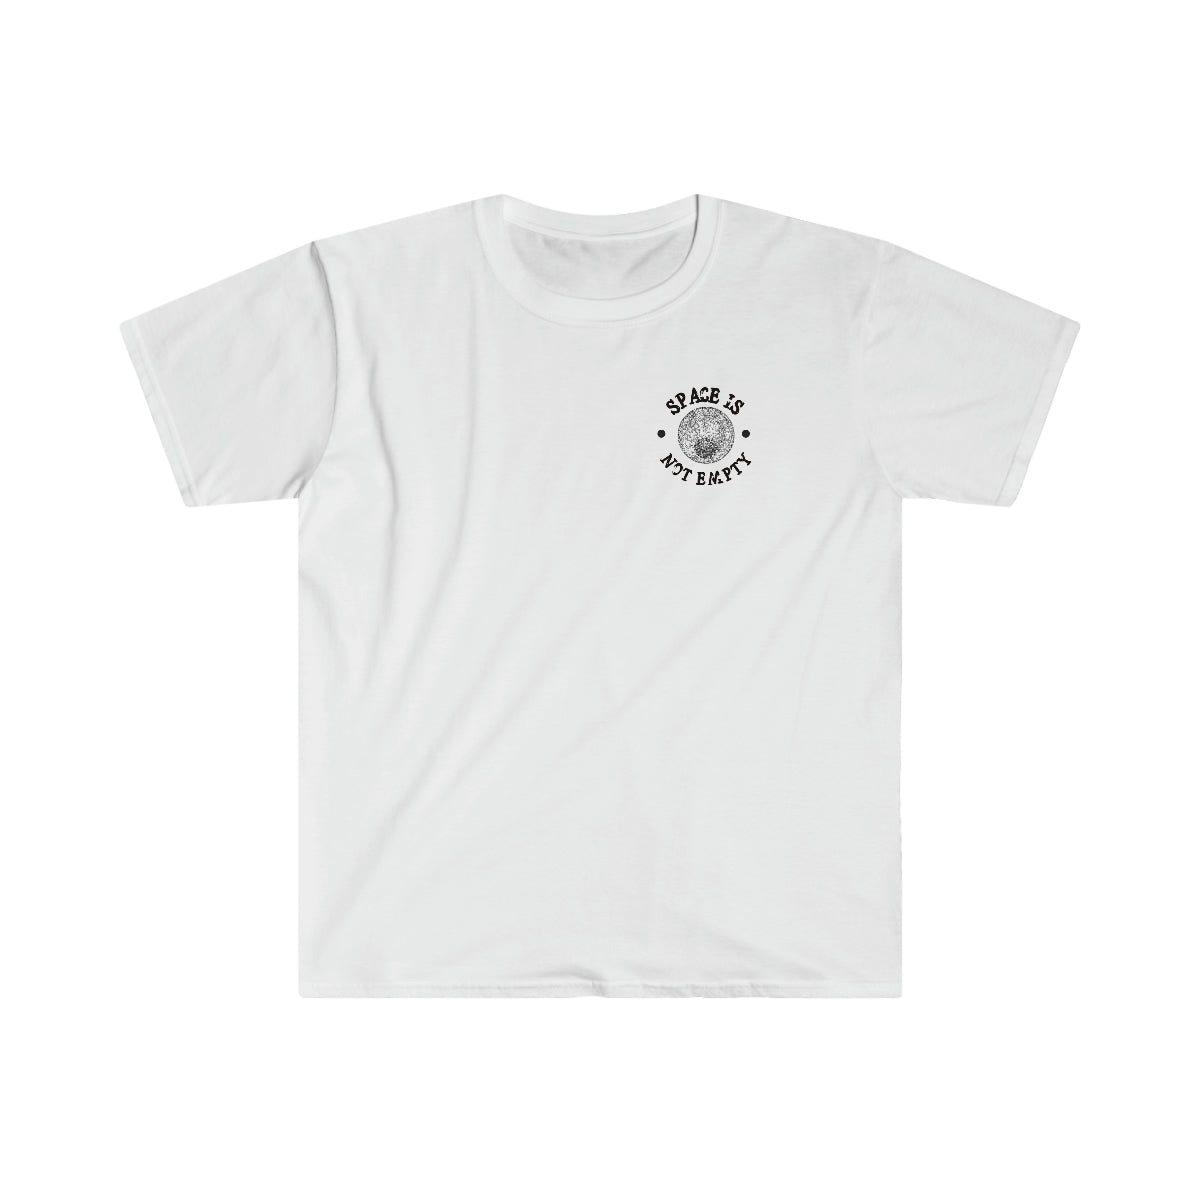 A white Apollo Docking T-Shirt, perfect for any space enthusiast.